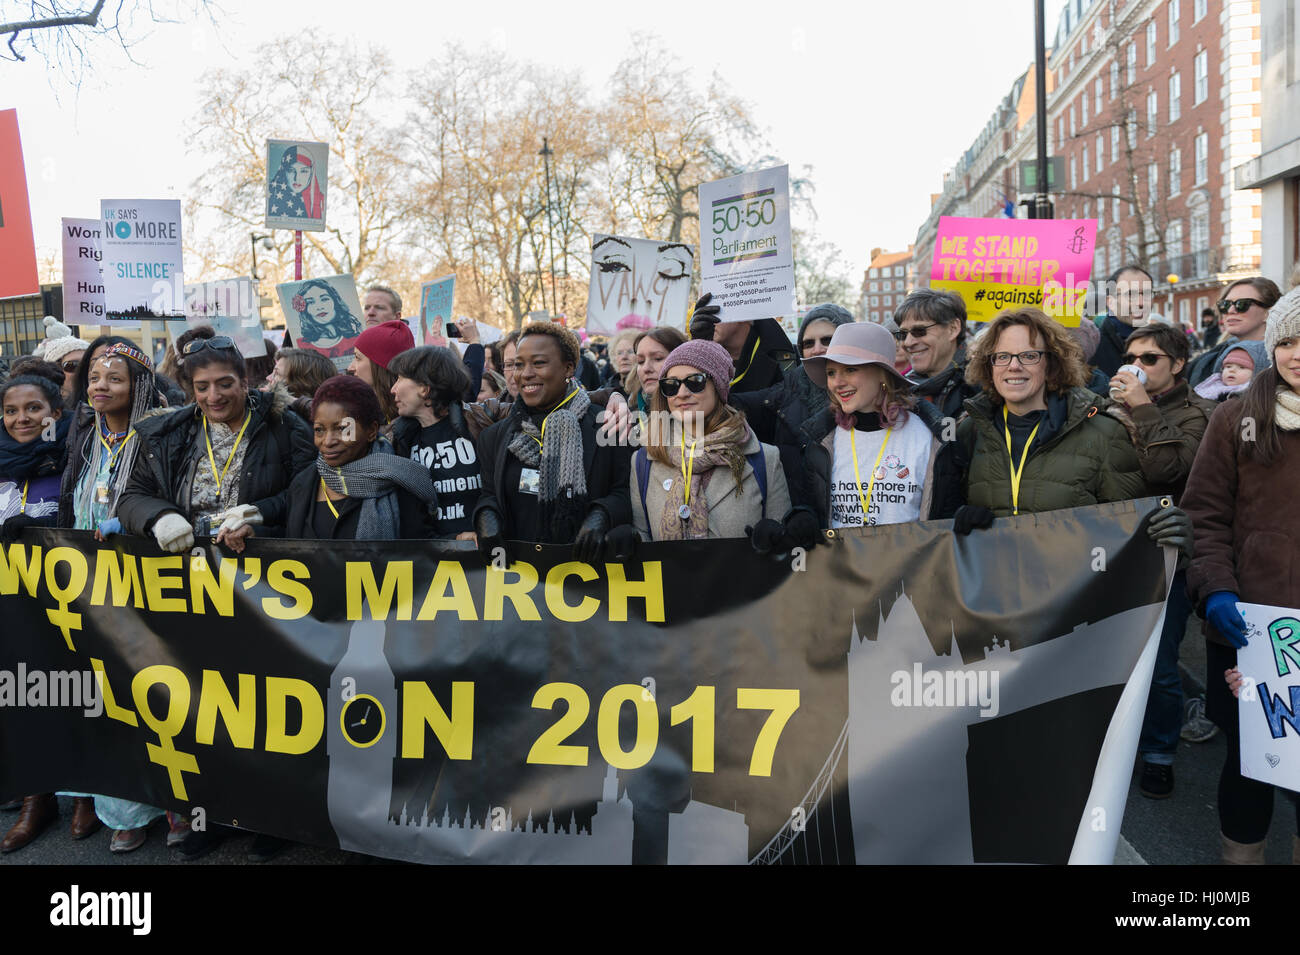 London, UK. 21st January 2017. Around 100,000 people attended 'Women's March on London' as part of a global day of action on the first day of Donald Trump's presidency. Participants marched from the location of the American embassy in Grosvenor Square to Trafalgar Square in a protest against the 'politics of fear' as well as to defend human rights for all and promote civil liberties. Wiktor Szymanowicz/Alamy Live News Stock Photo